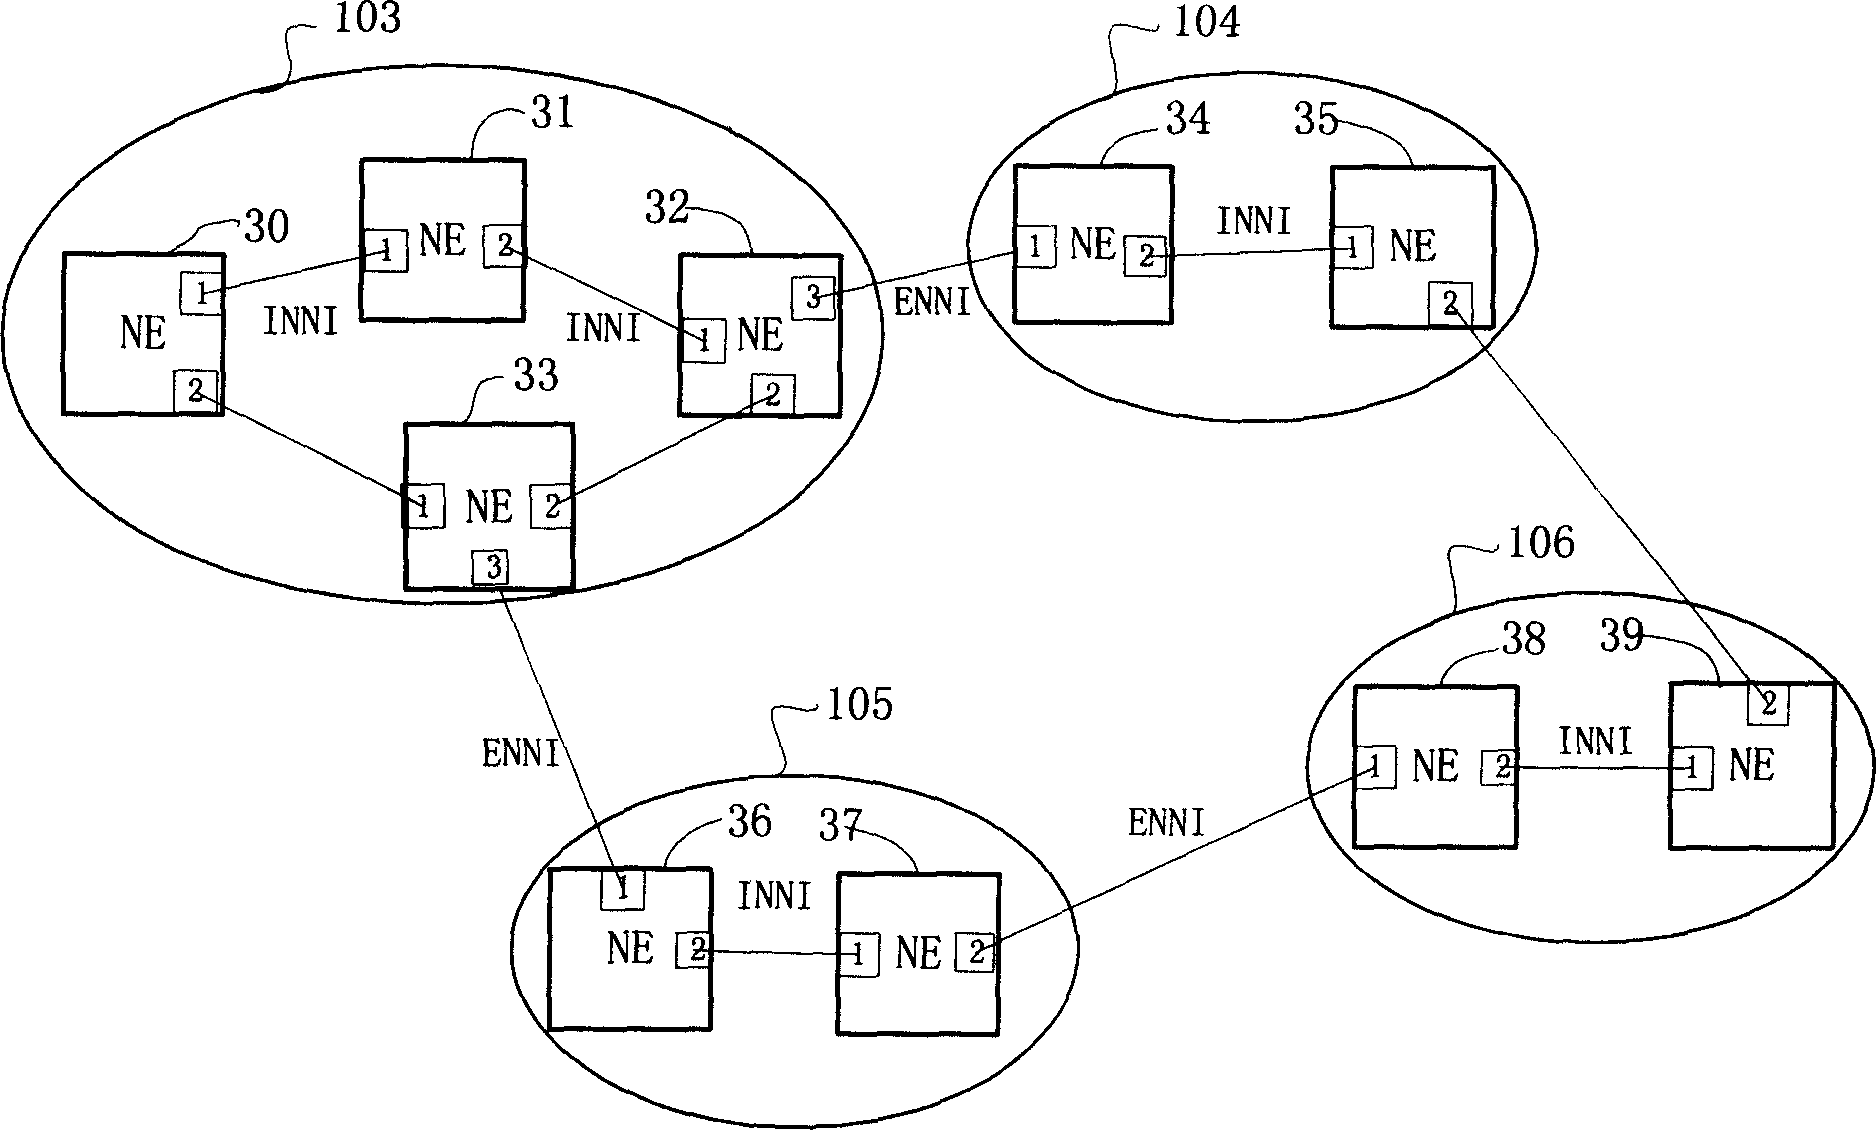 Method for realizing connection service